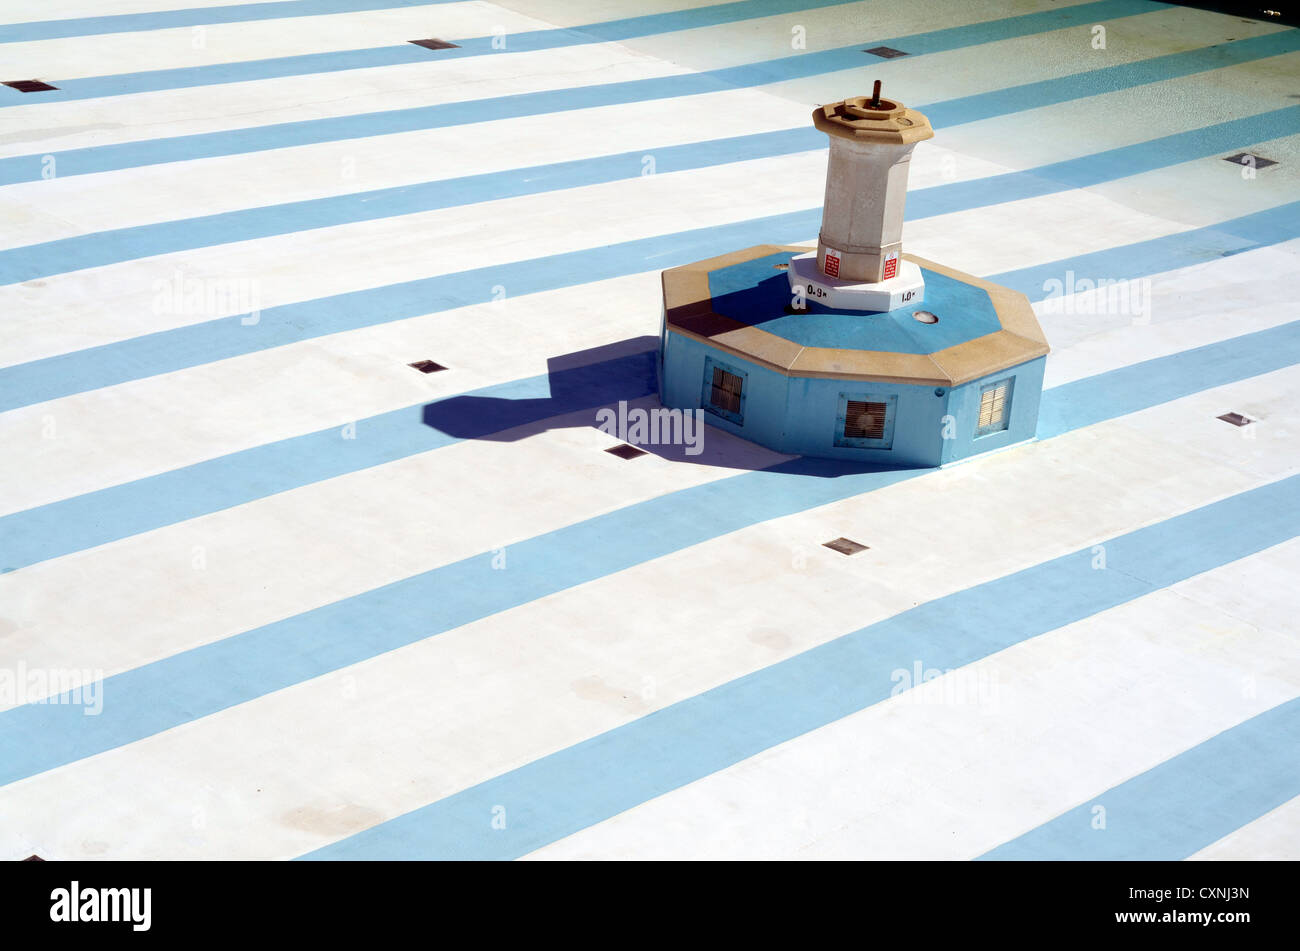 Plymouth Lido open air swimming pool Plymouth Hoe UK Stock Photo